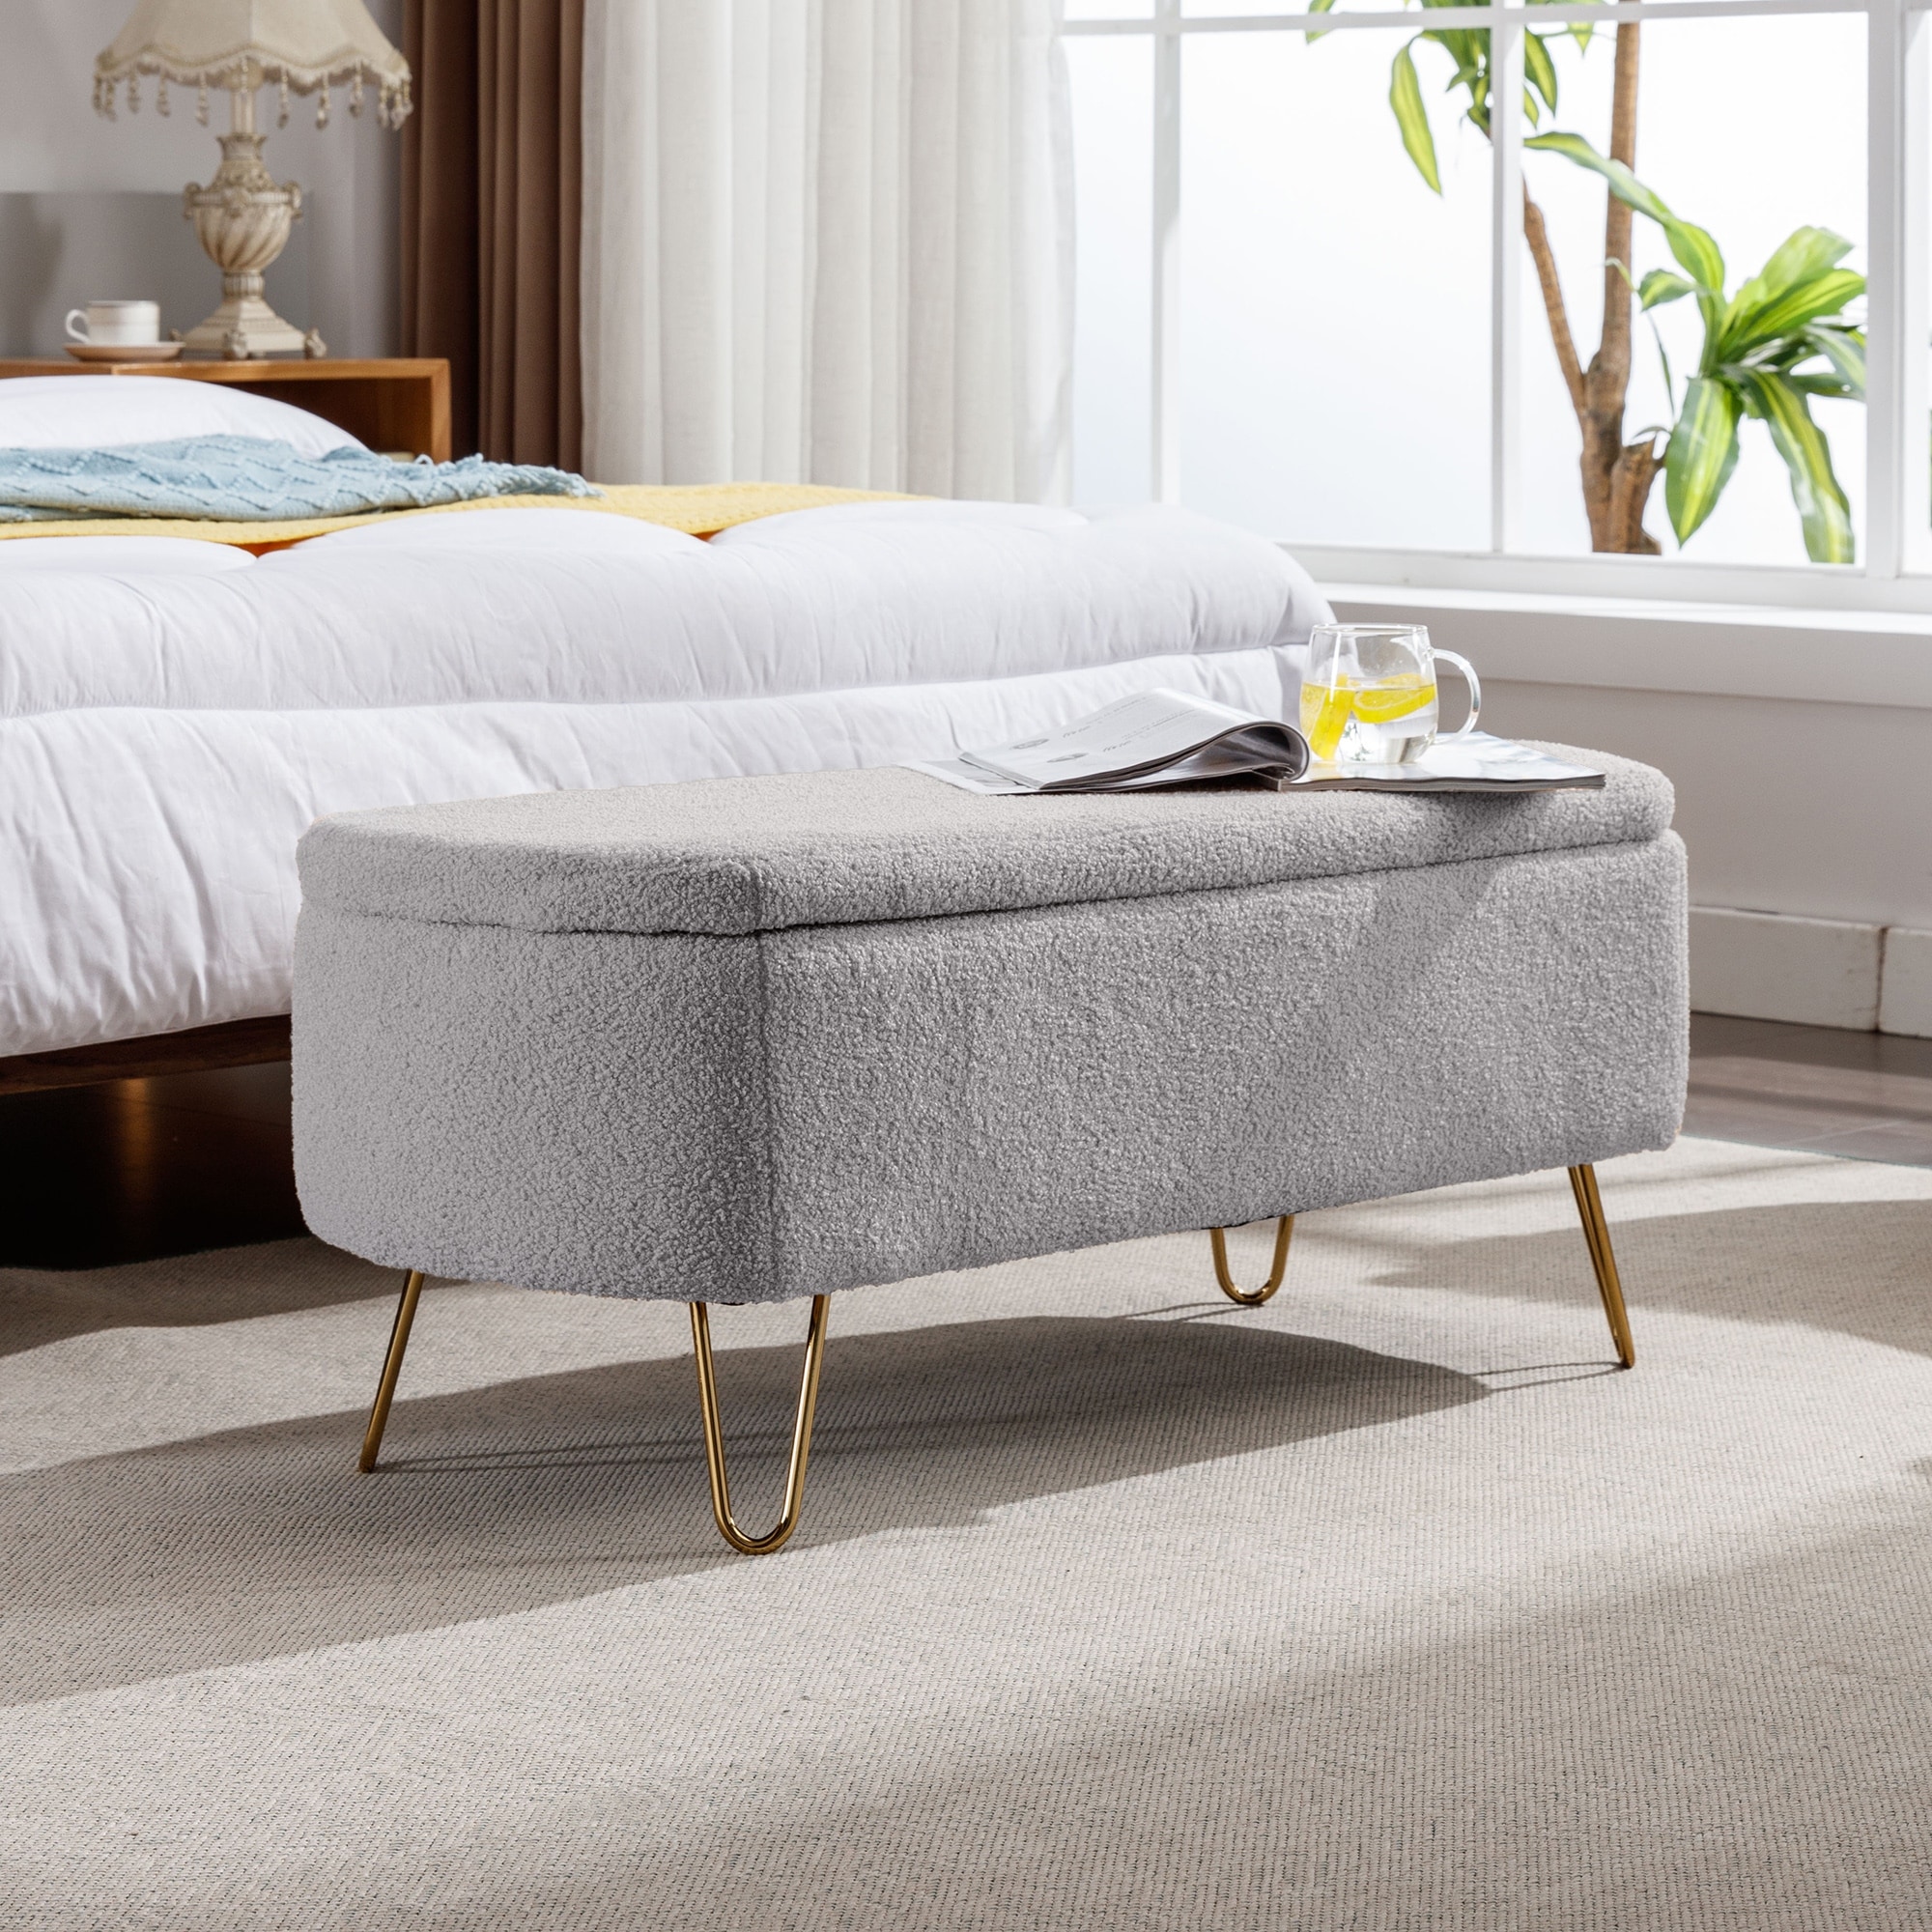 EDWINRAYLLC Storage Ottoman Bench Faux Fur Entryway Upholstered Bench Padded Standard Ottoman with Storage and Gold Legs, Grey